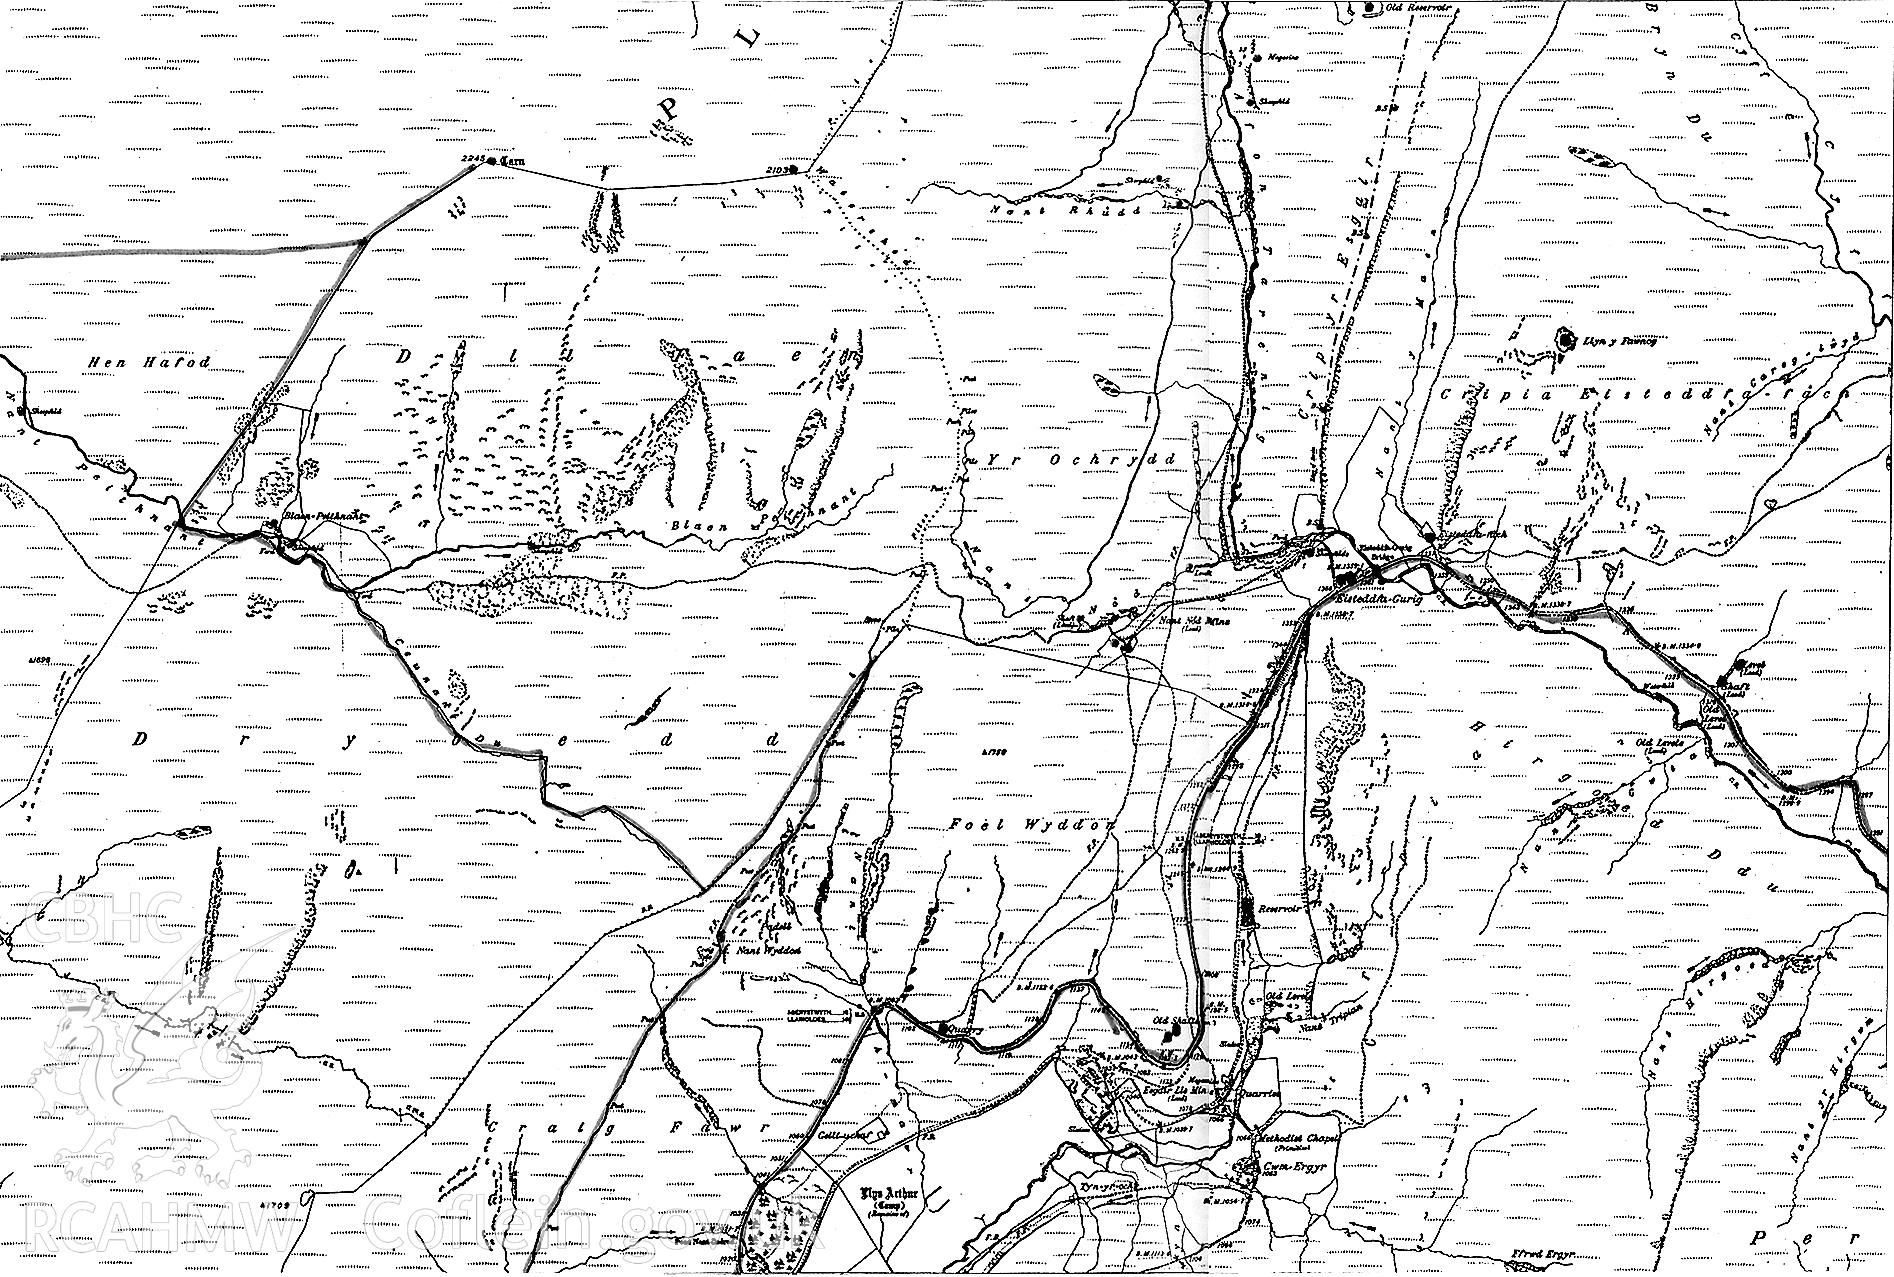 Part of a map showing an area South of Pynlimon Fach. Undated.